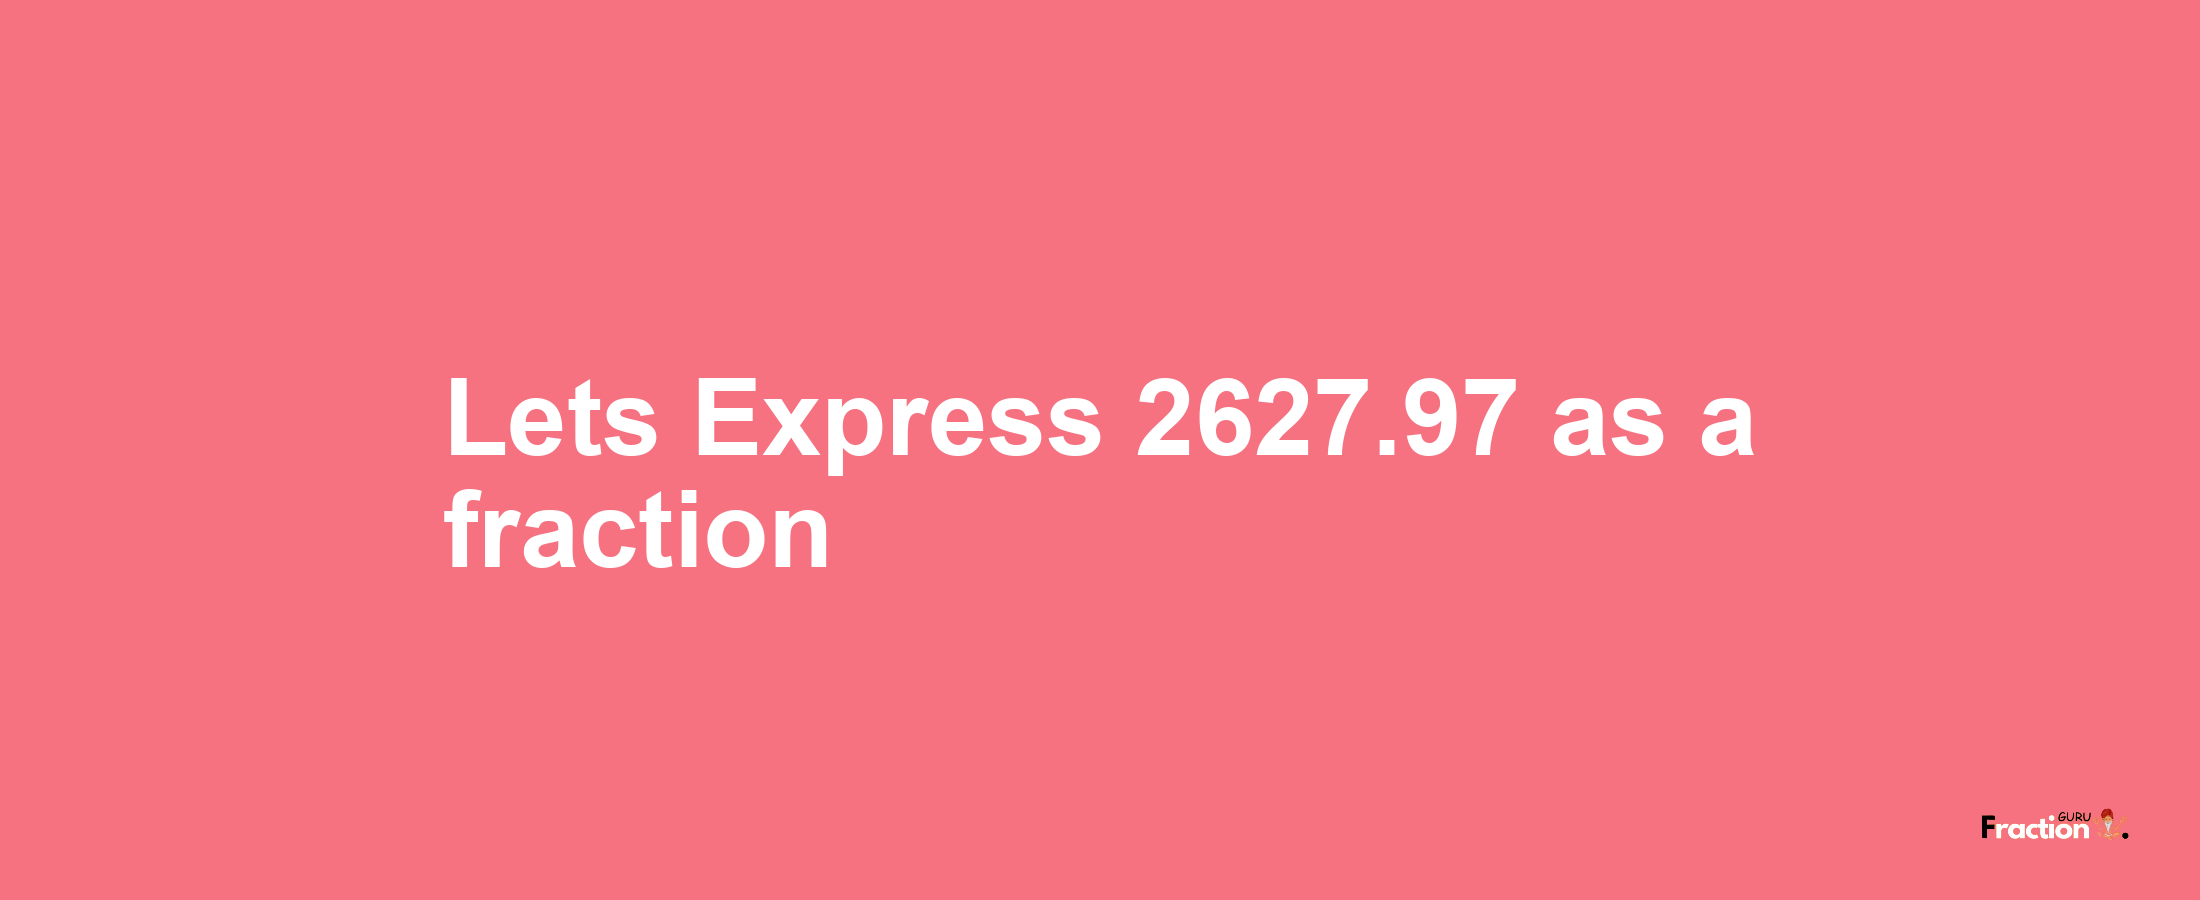 Lets Express 2627.97 as afraction